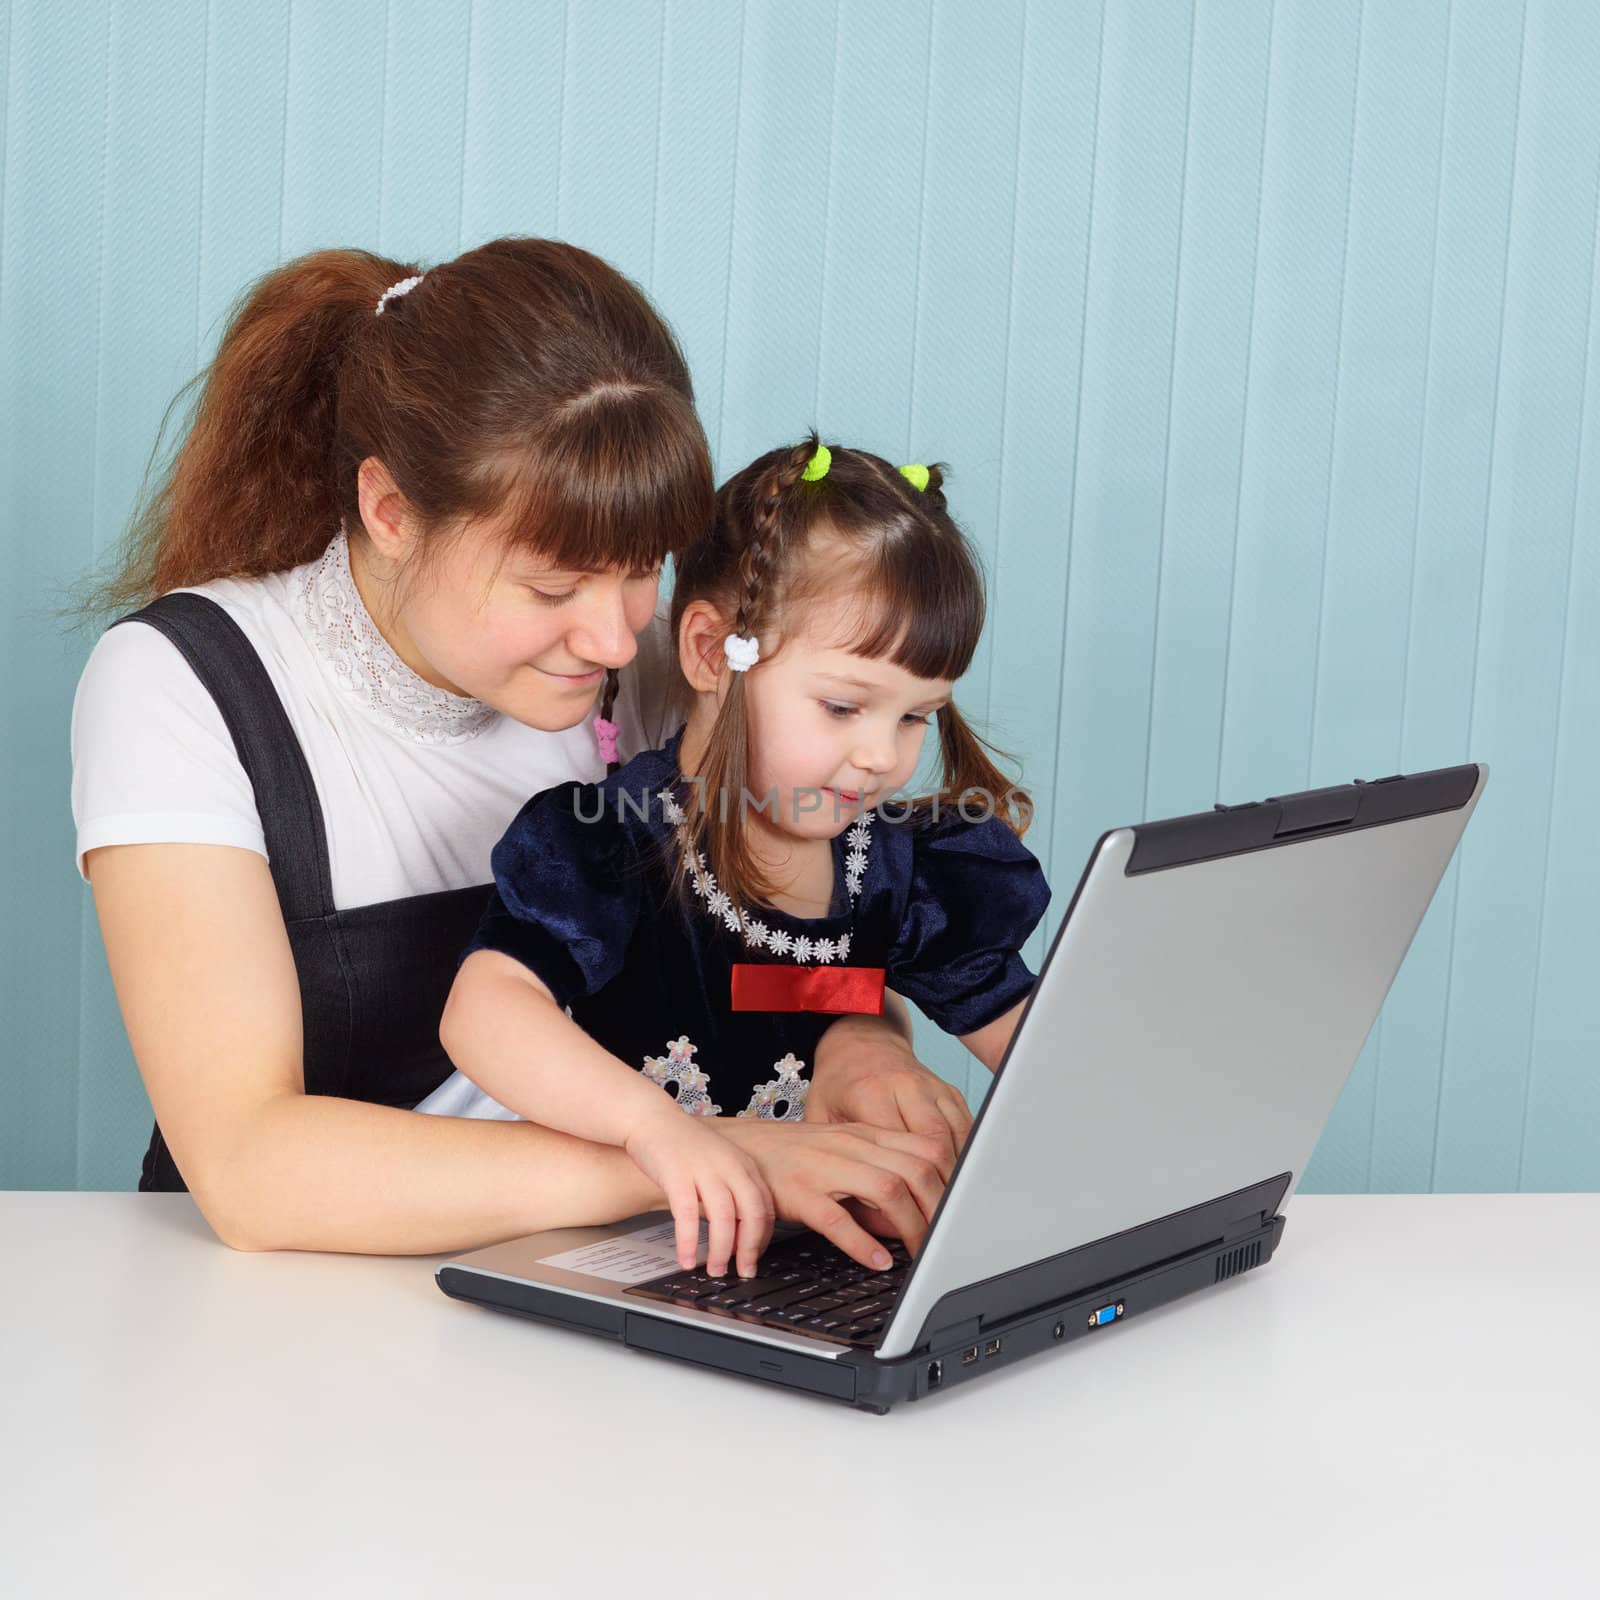 Mom teaches daughter to use computer by pzaxe